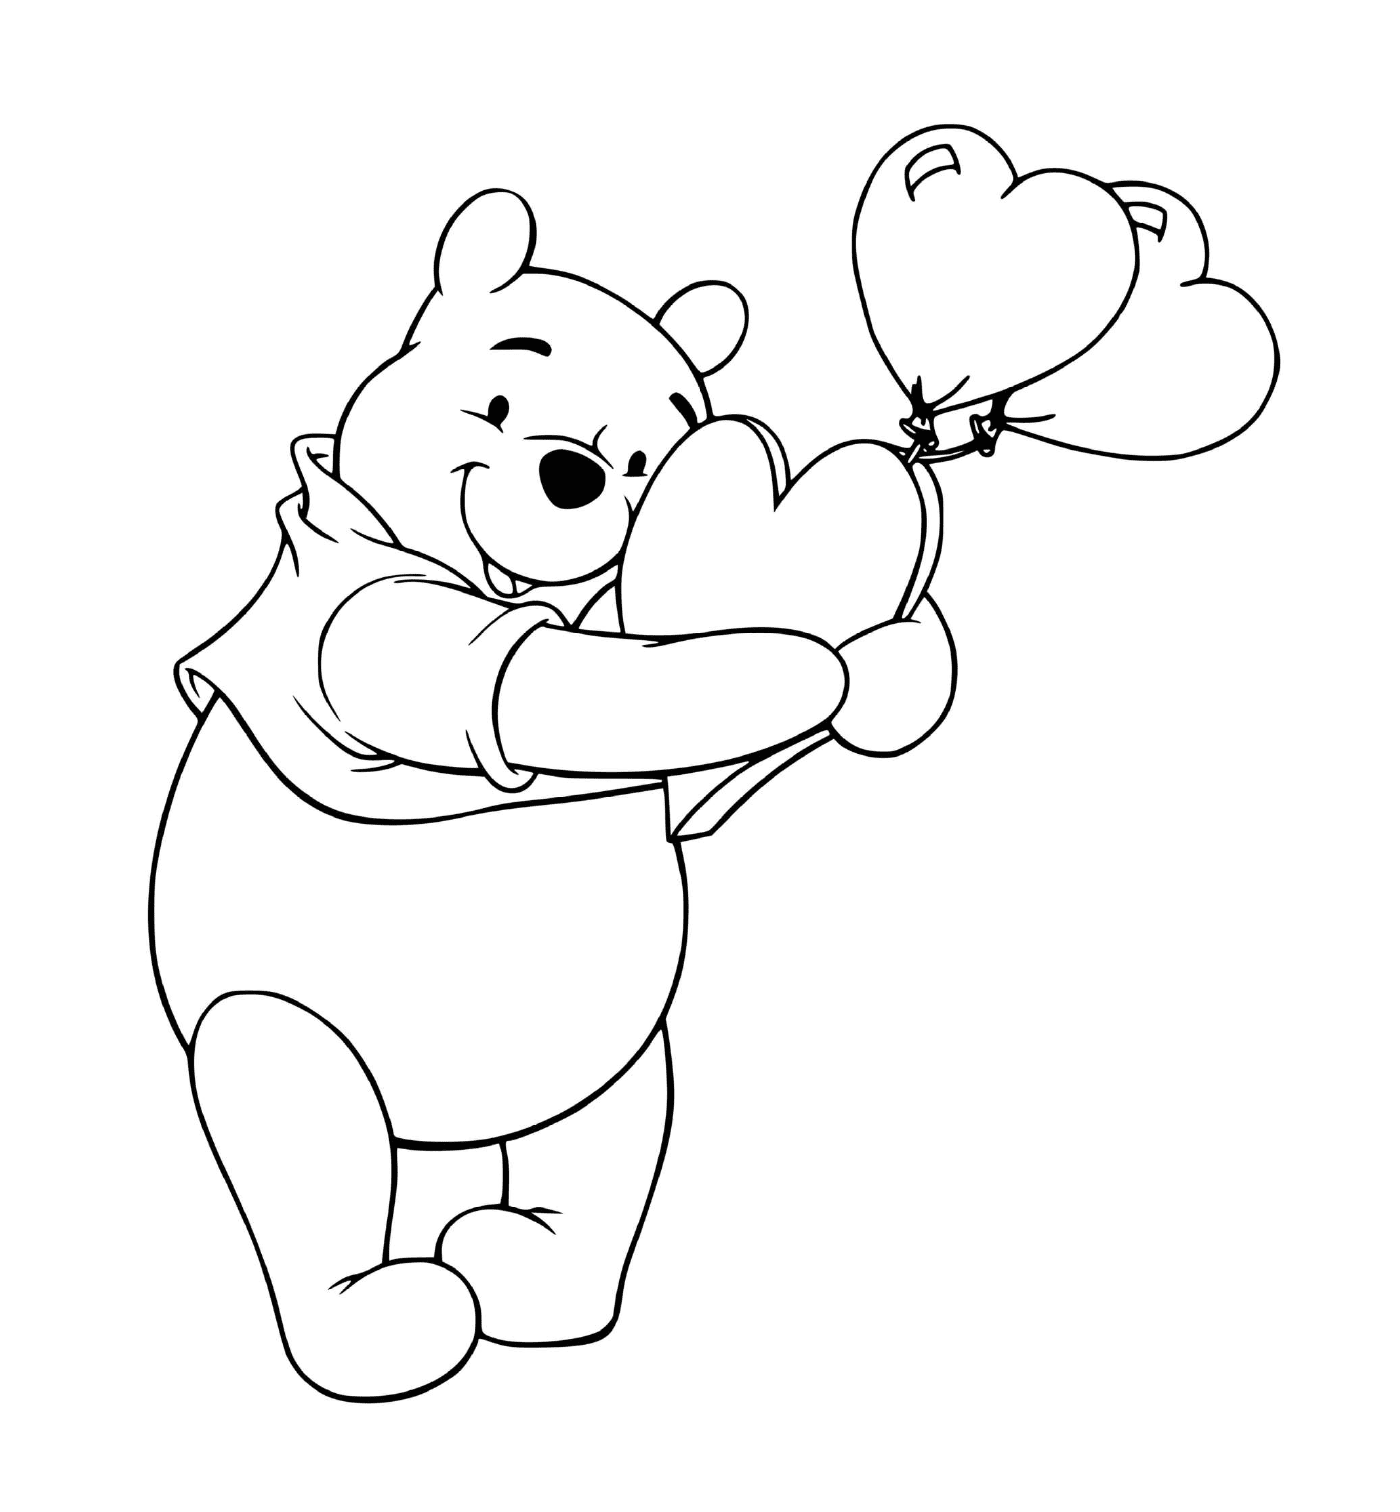  Winnie the bear with heart-shaped balloons 